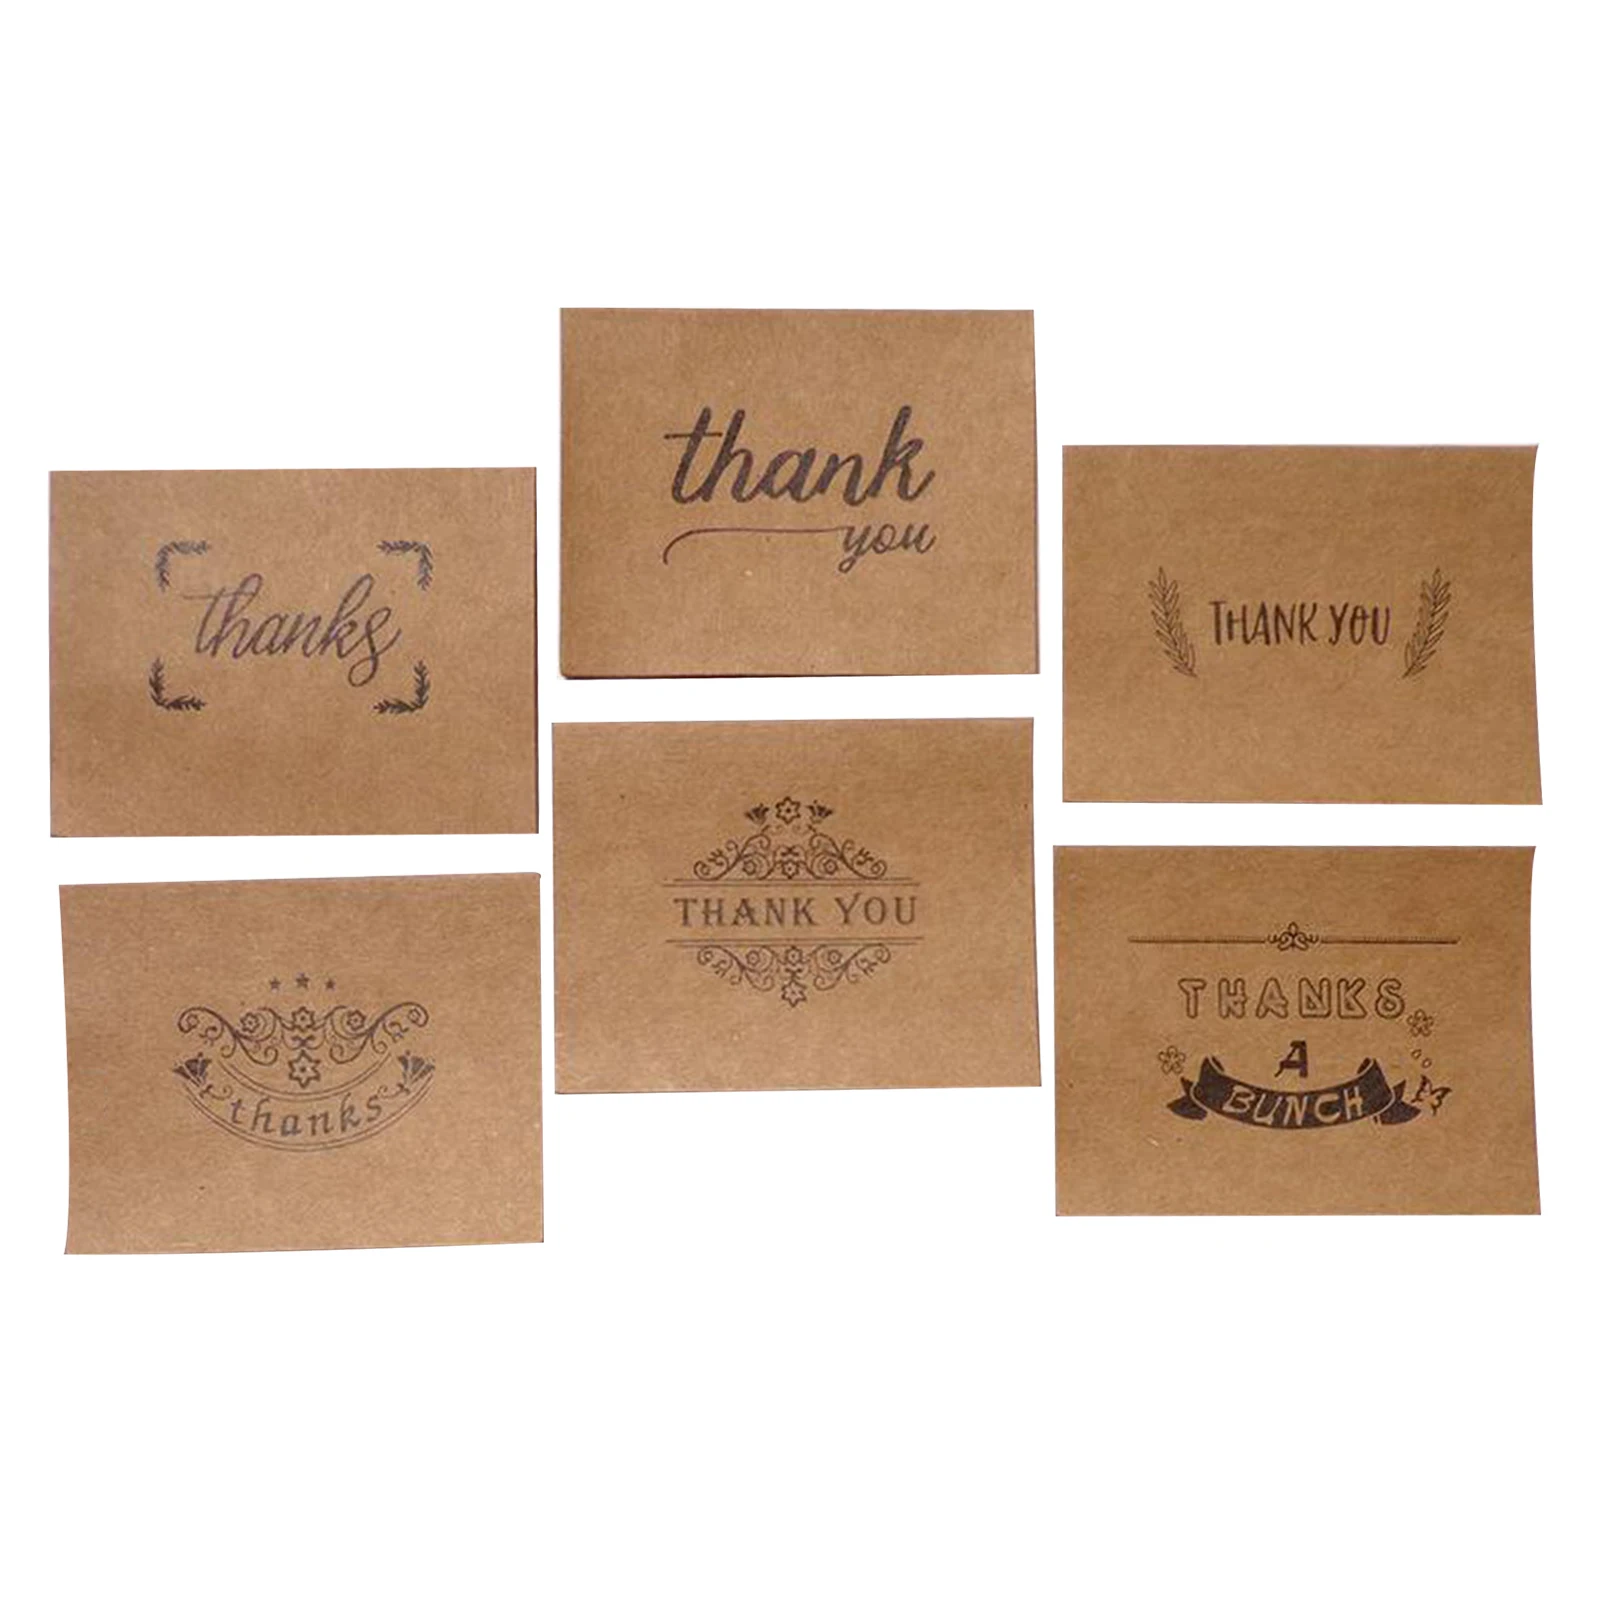 18-Pcs Blank Greeting Cards - Plain Cardstock Folded , Standard Straight Corners, Envelopes Included 4 x 6 Inches